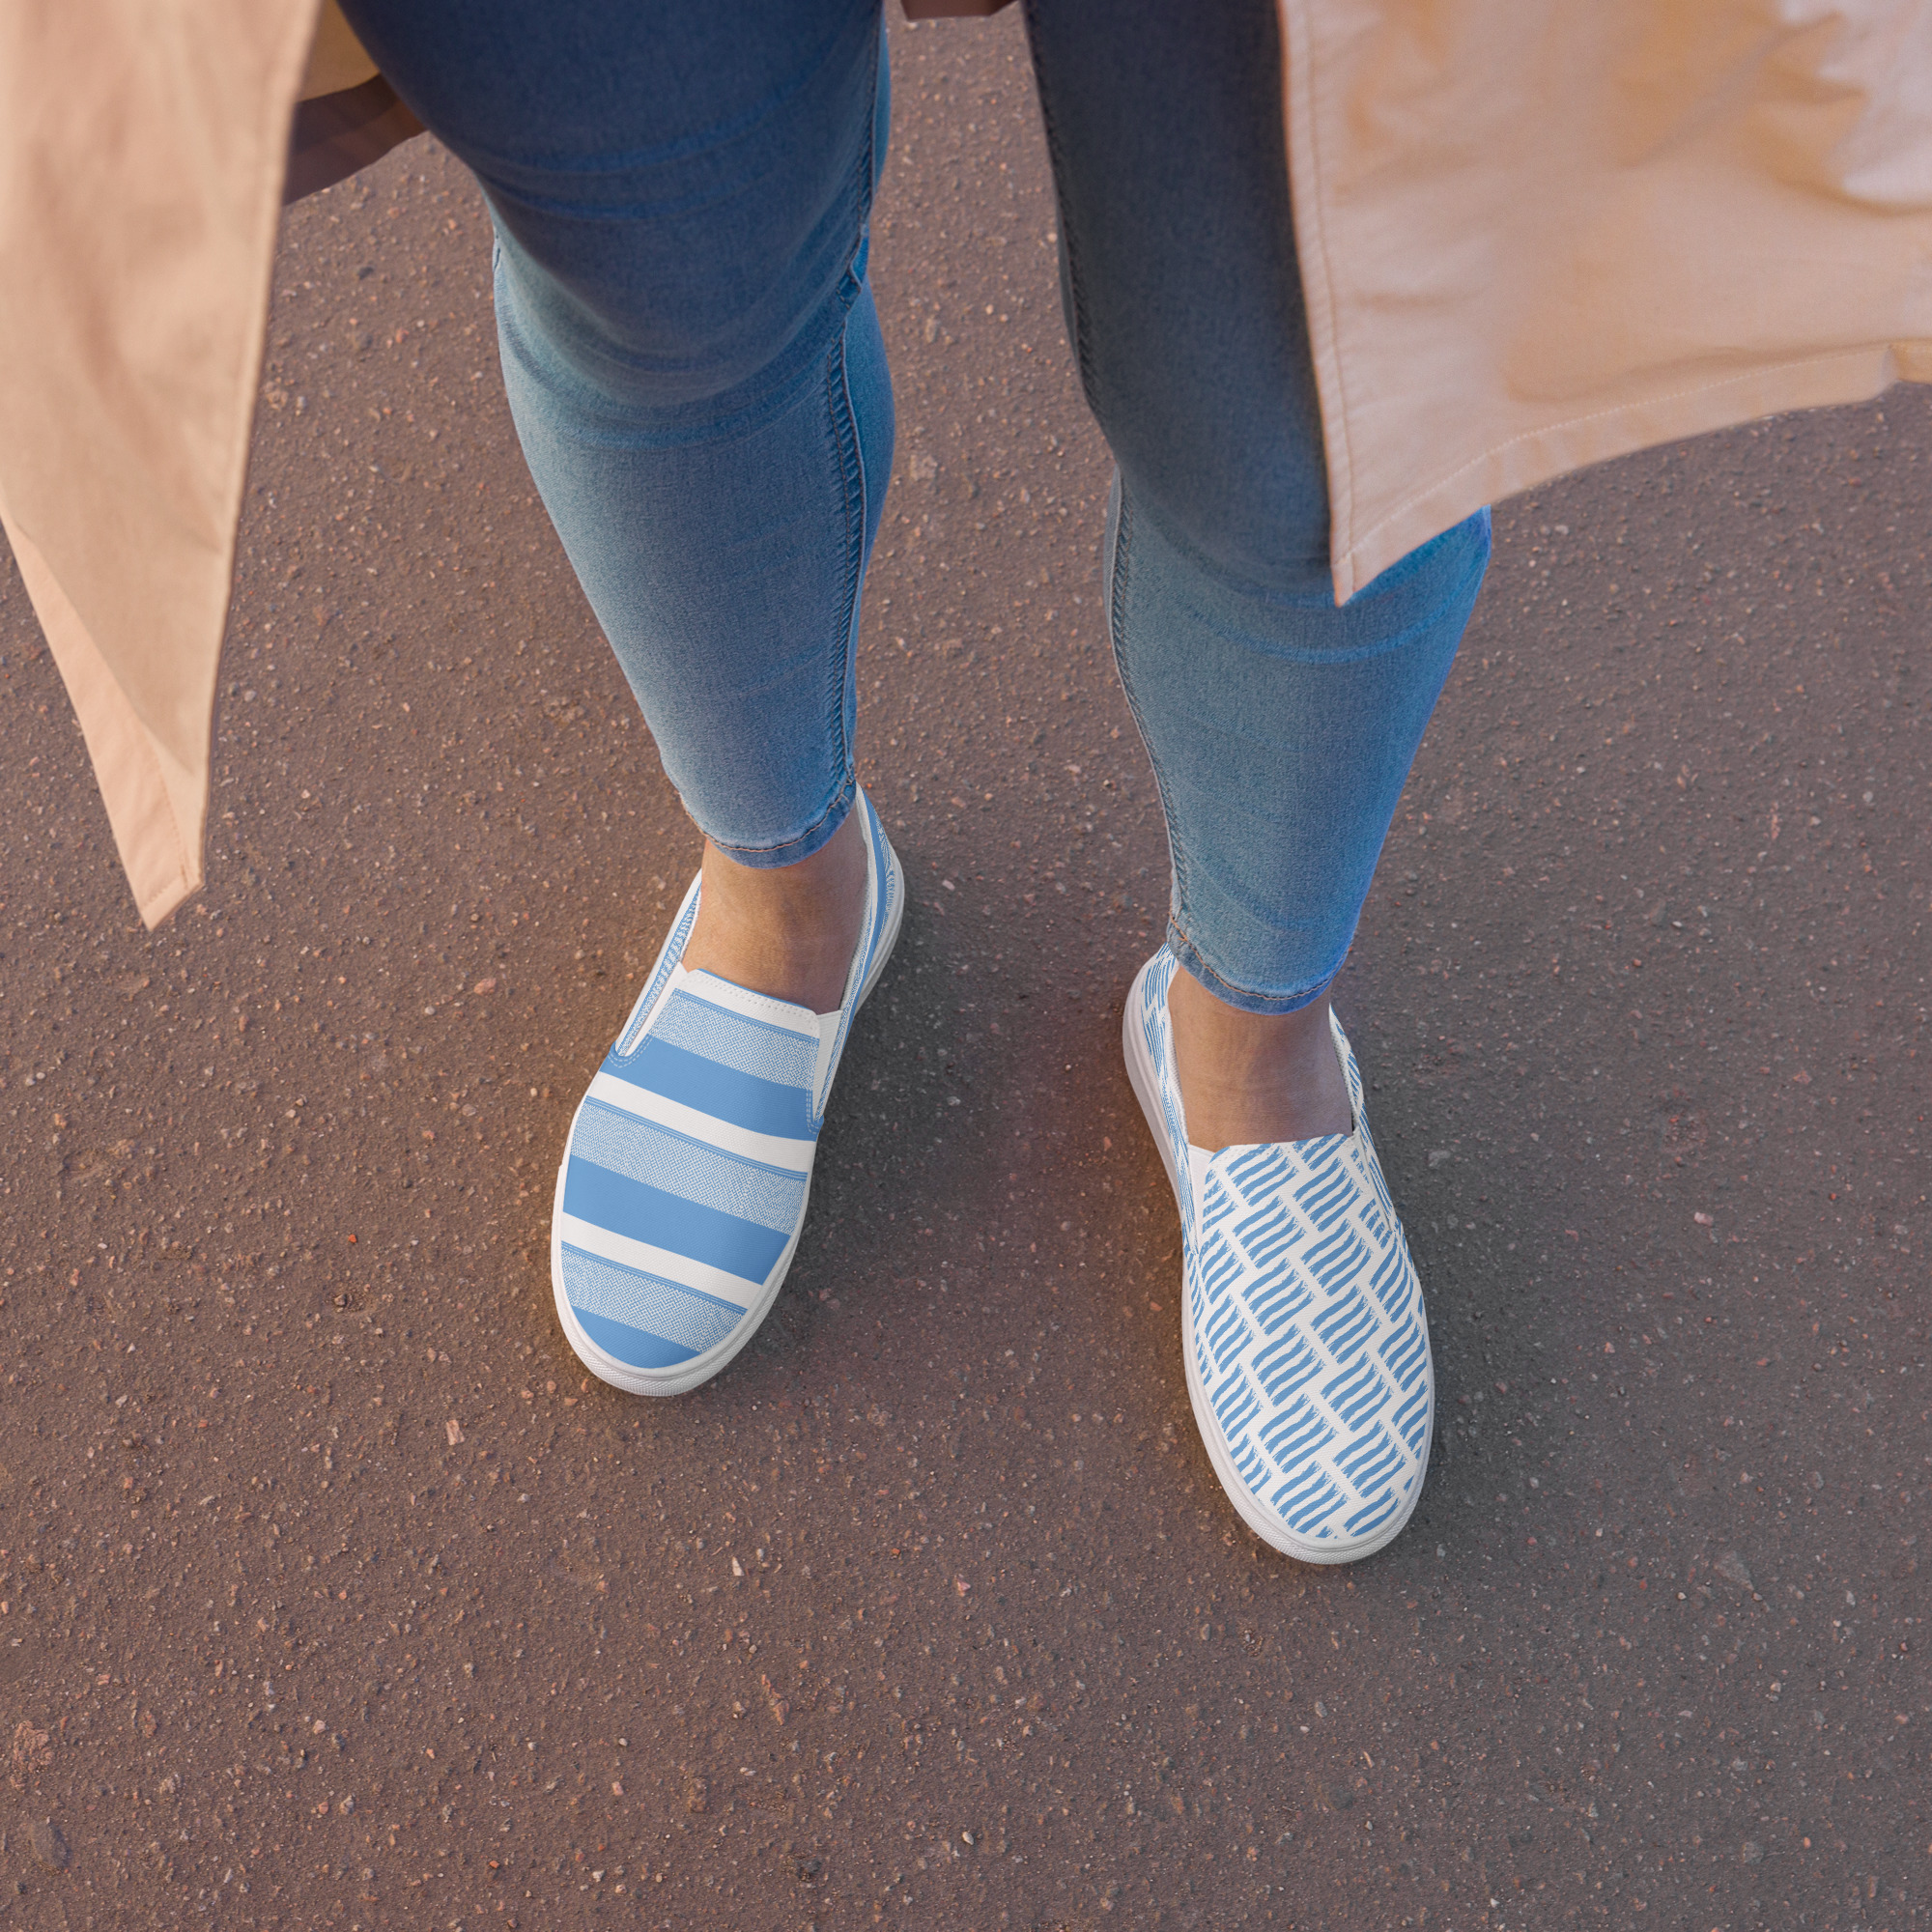 Introducing the "Argentinas" ...the light blue and white Women Slip on Canvas Shoes in the 2023-2024 ACVKs shoe line.